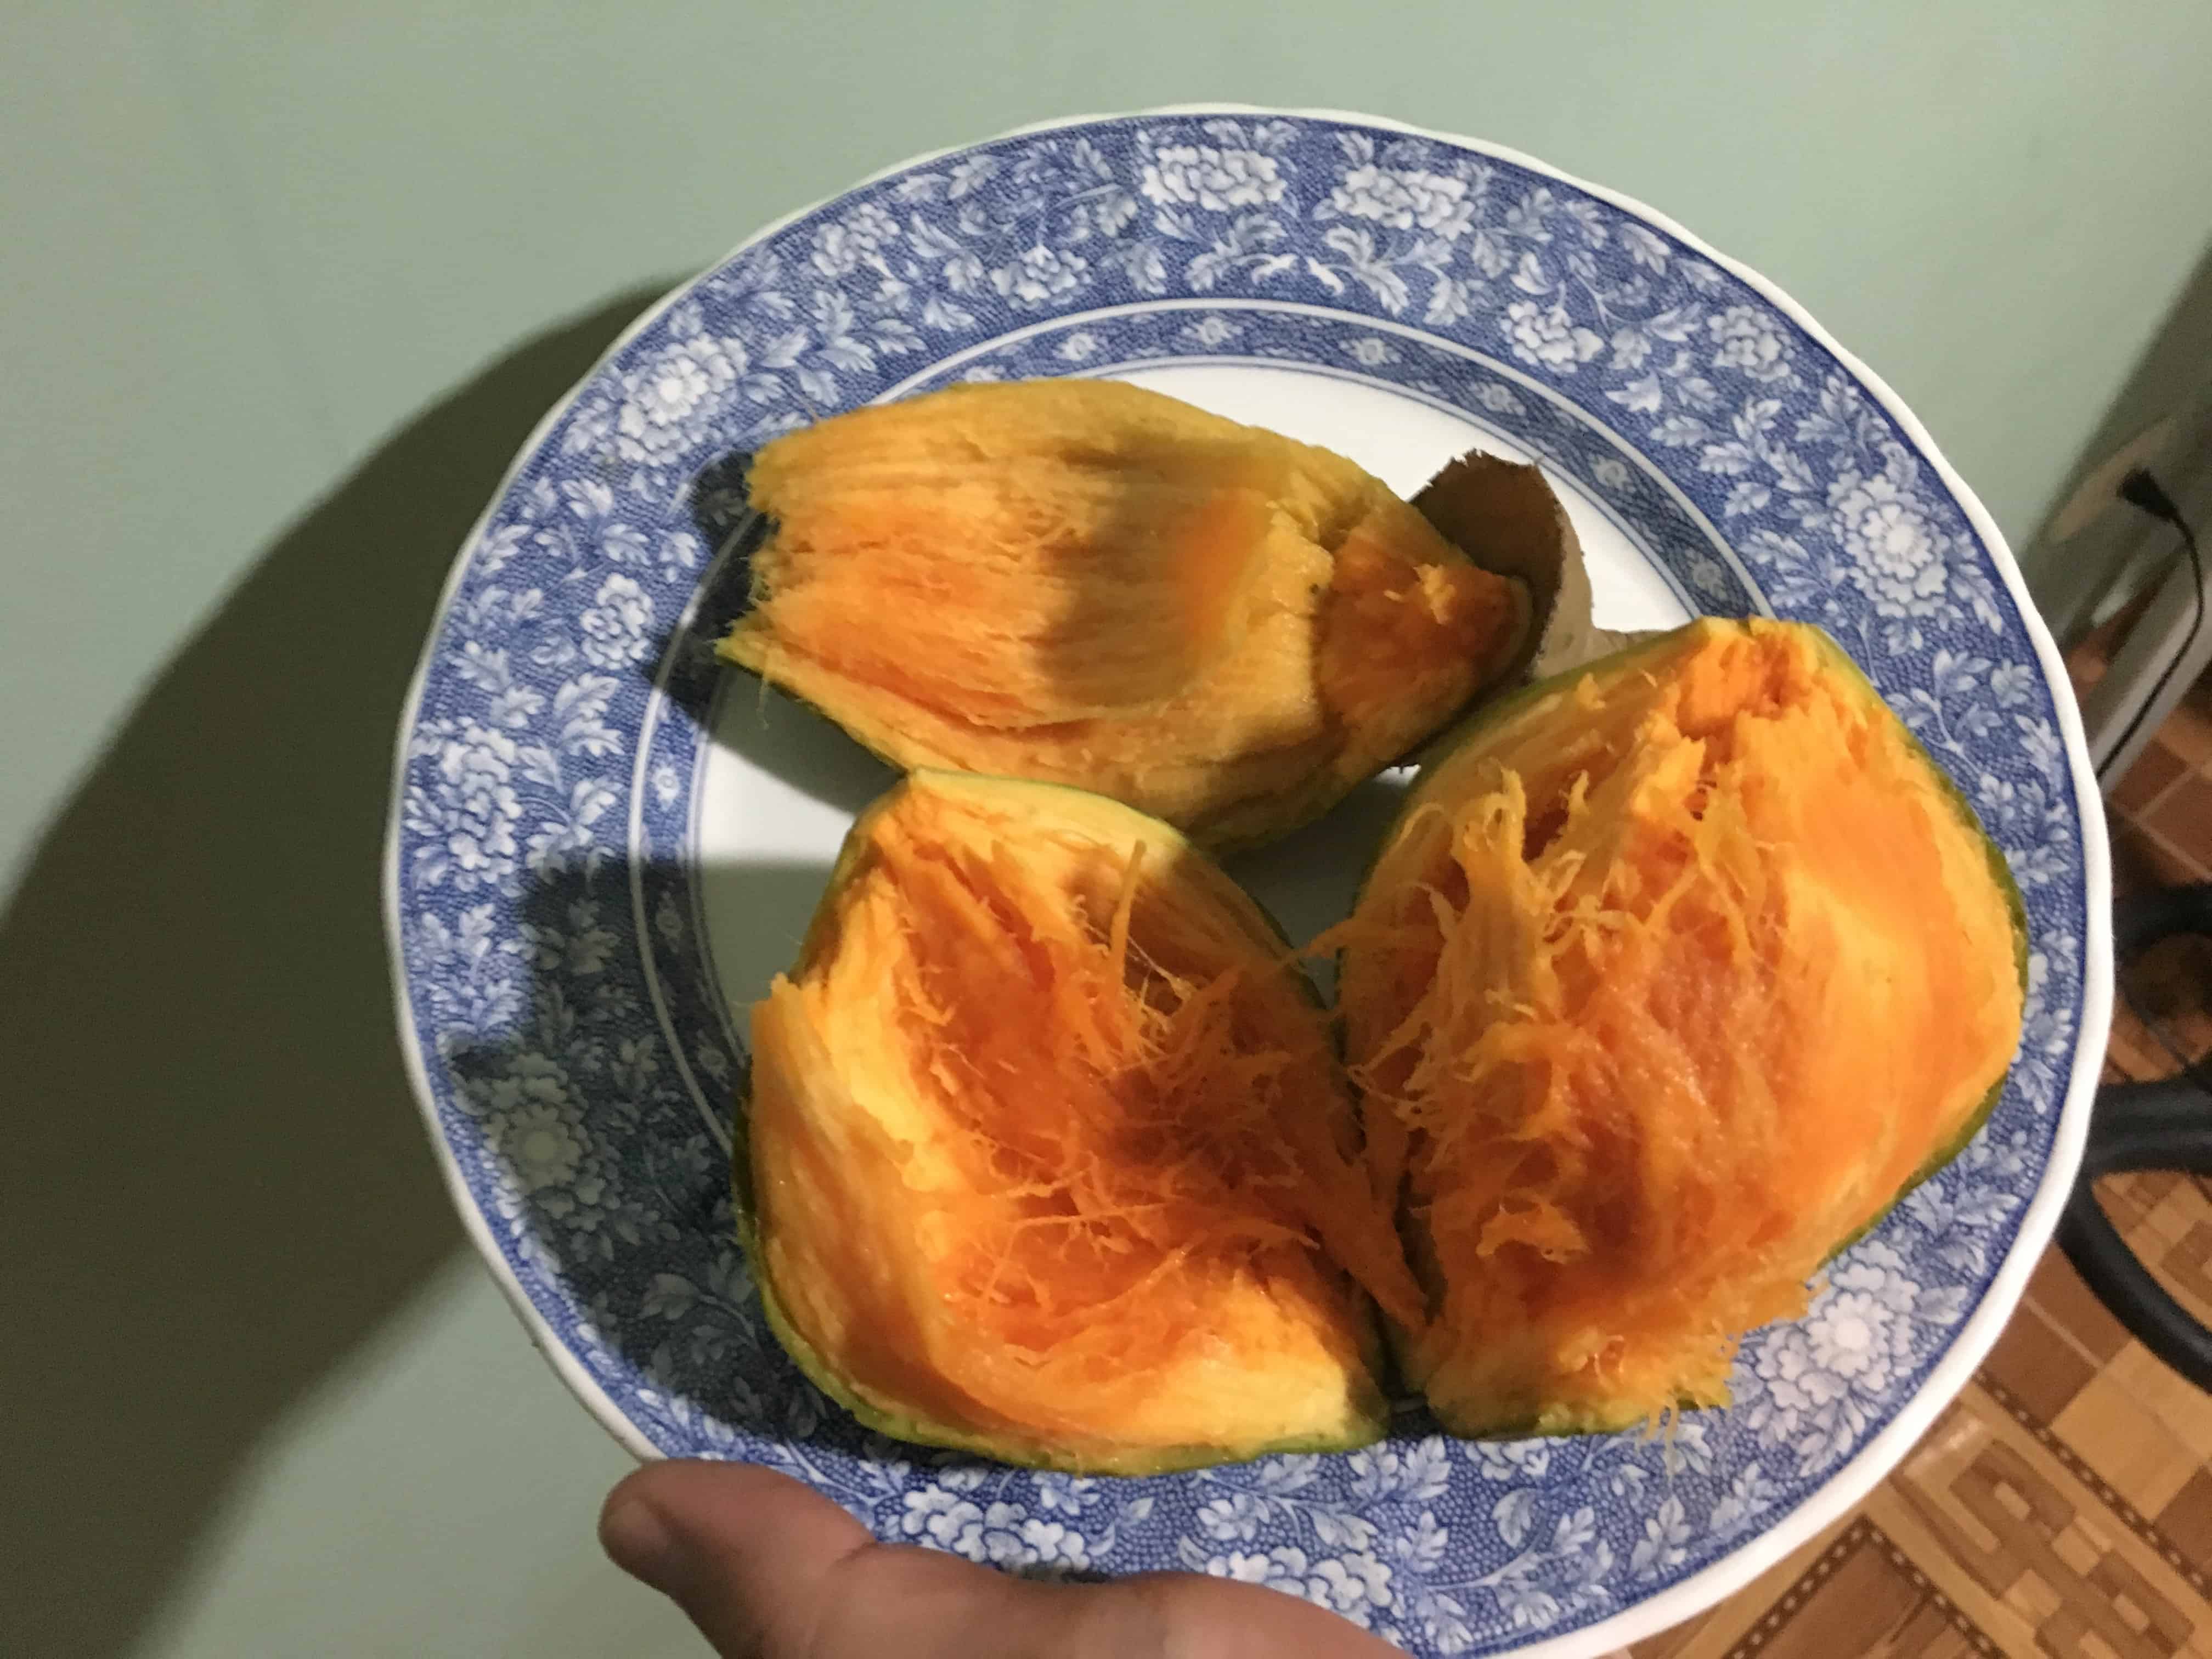 Sapote Fruit in Colombia